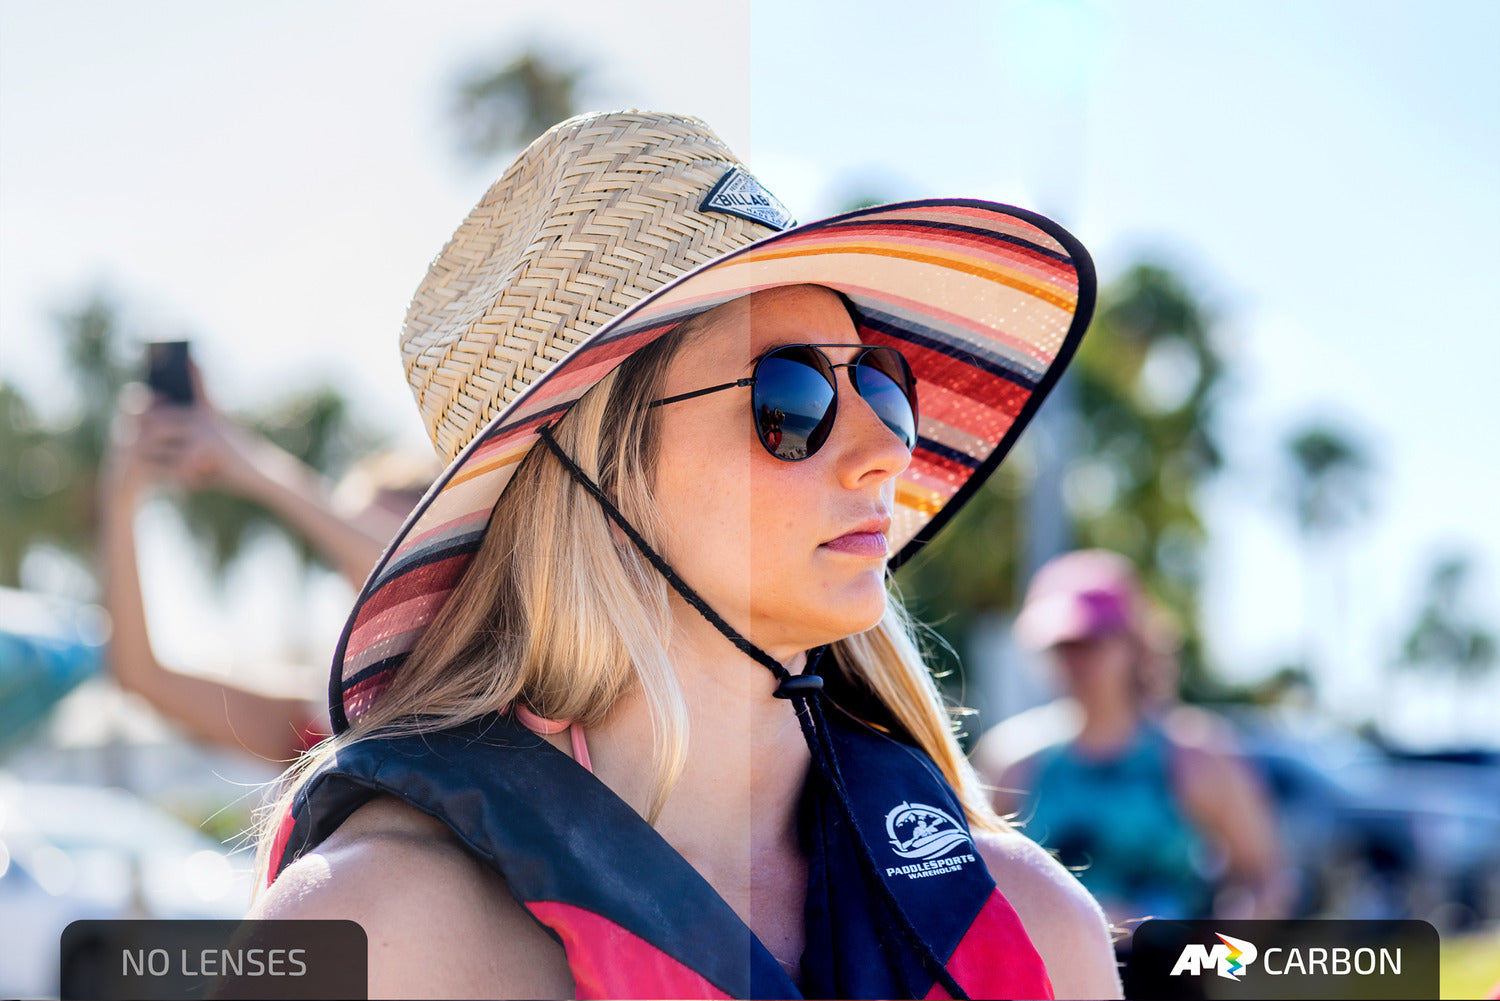 Split image of woman wearing black AMP Carbon sunglasses out in the sun. Comparison between normal view and a view affected by AMP Carbon lenses